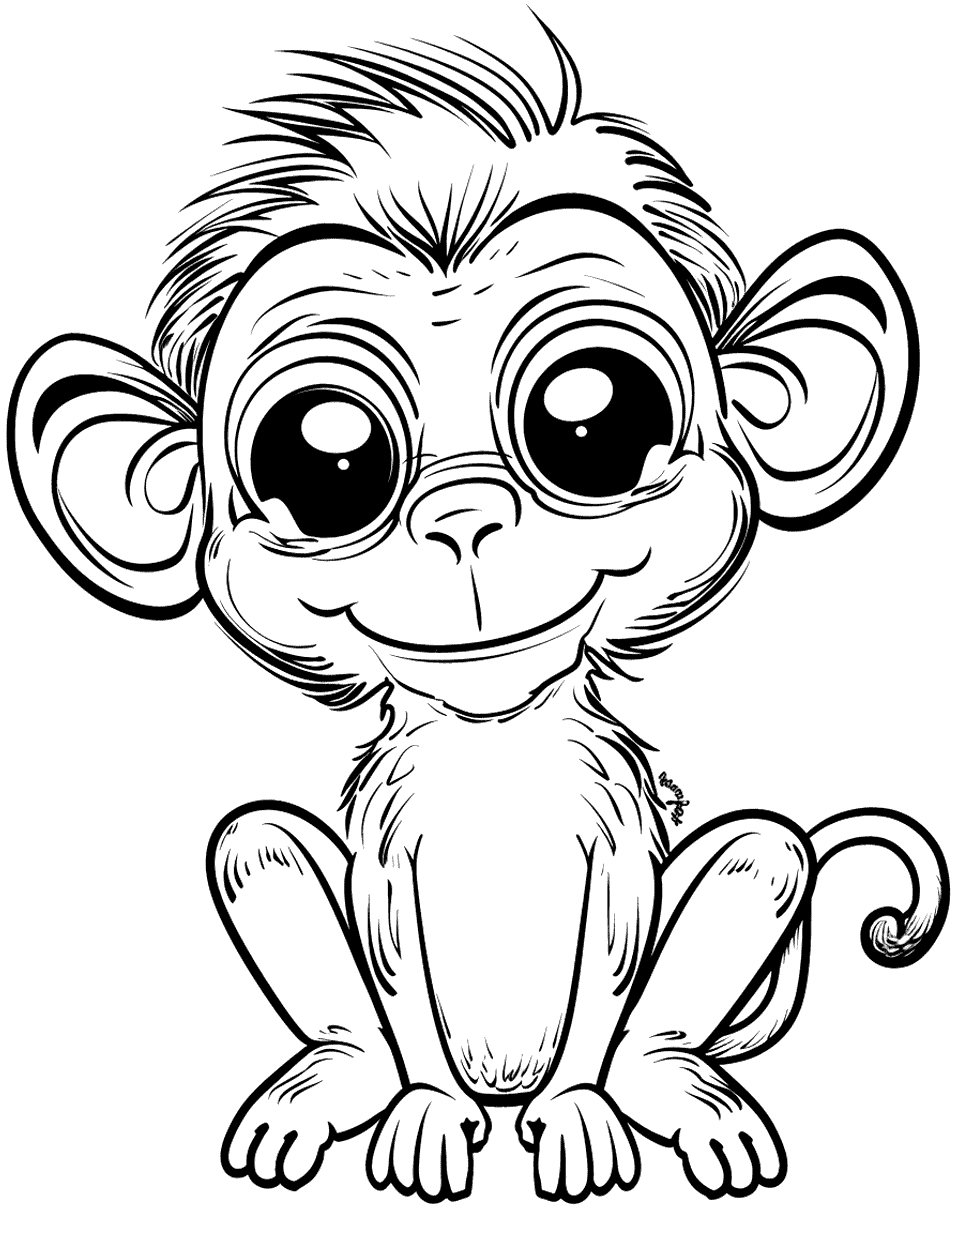 Monkey With Big Eyes Coloring Page - An adorable monkey with unusually large eyes, looking curious.